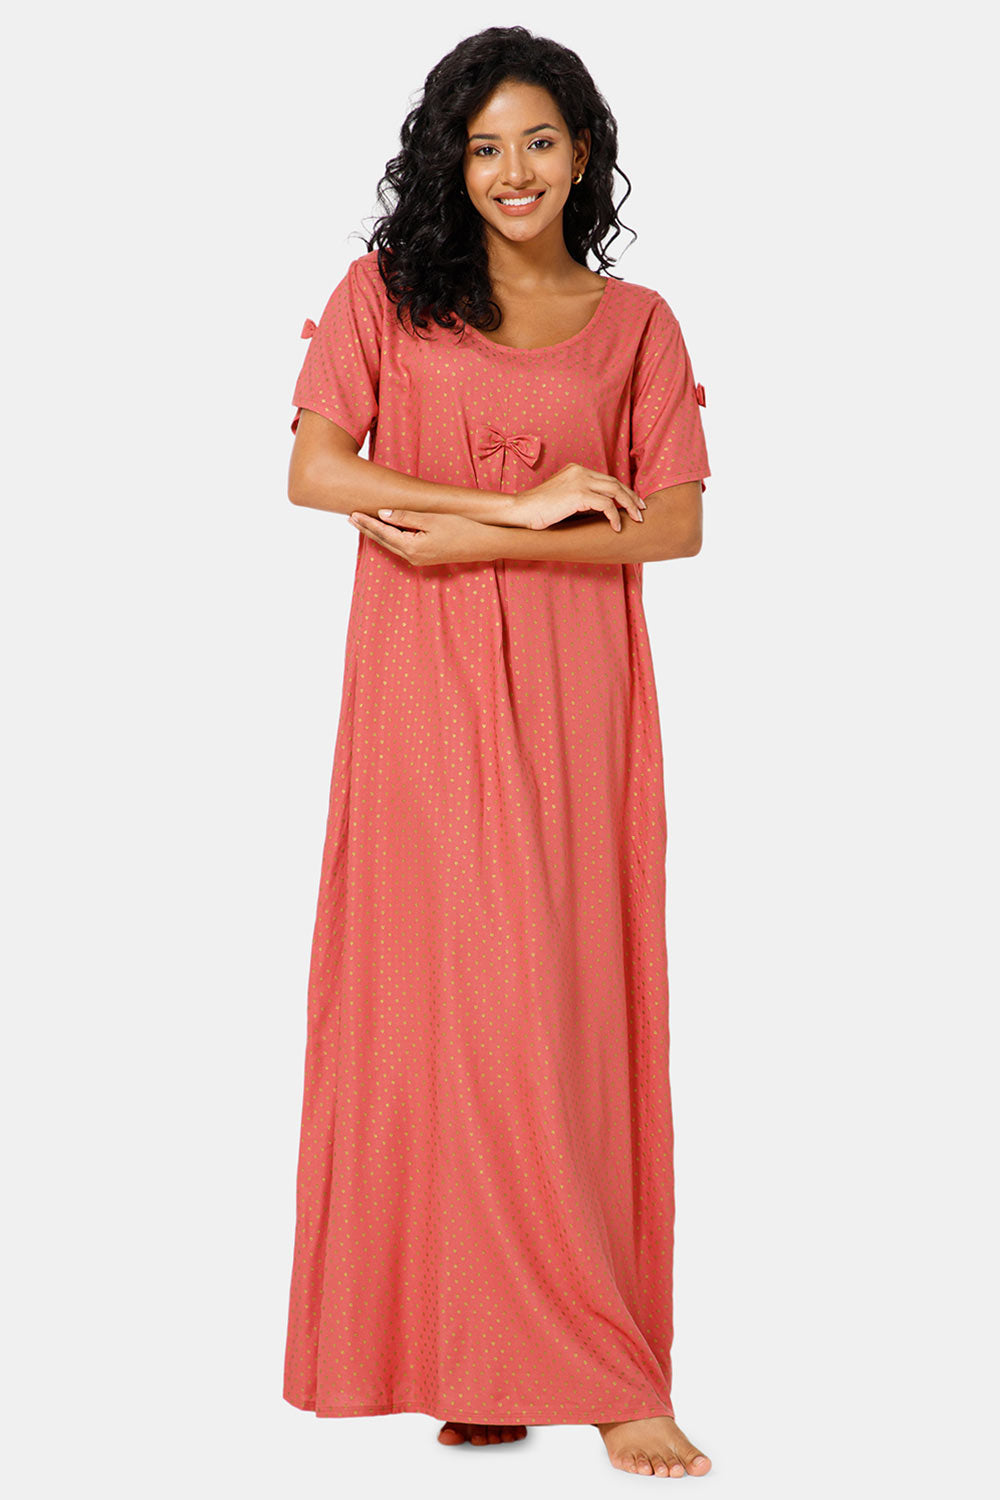 Soft red cotton nightie for a fresh and good quality sleep